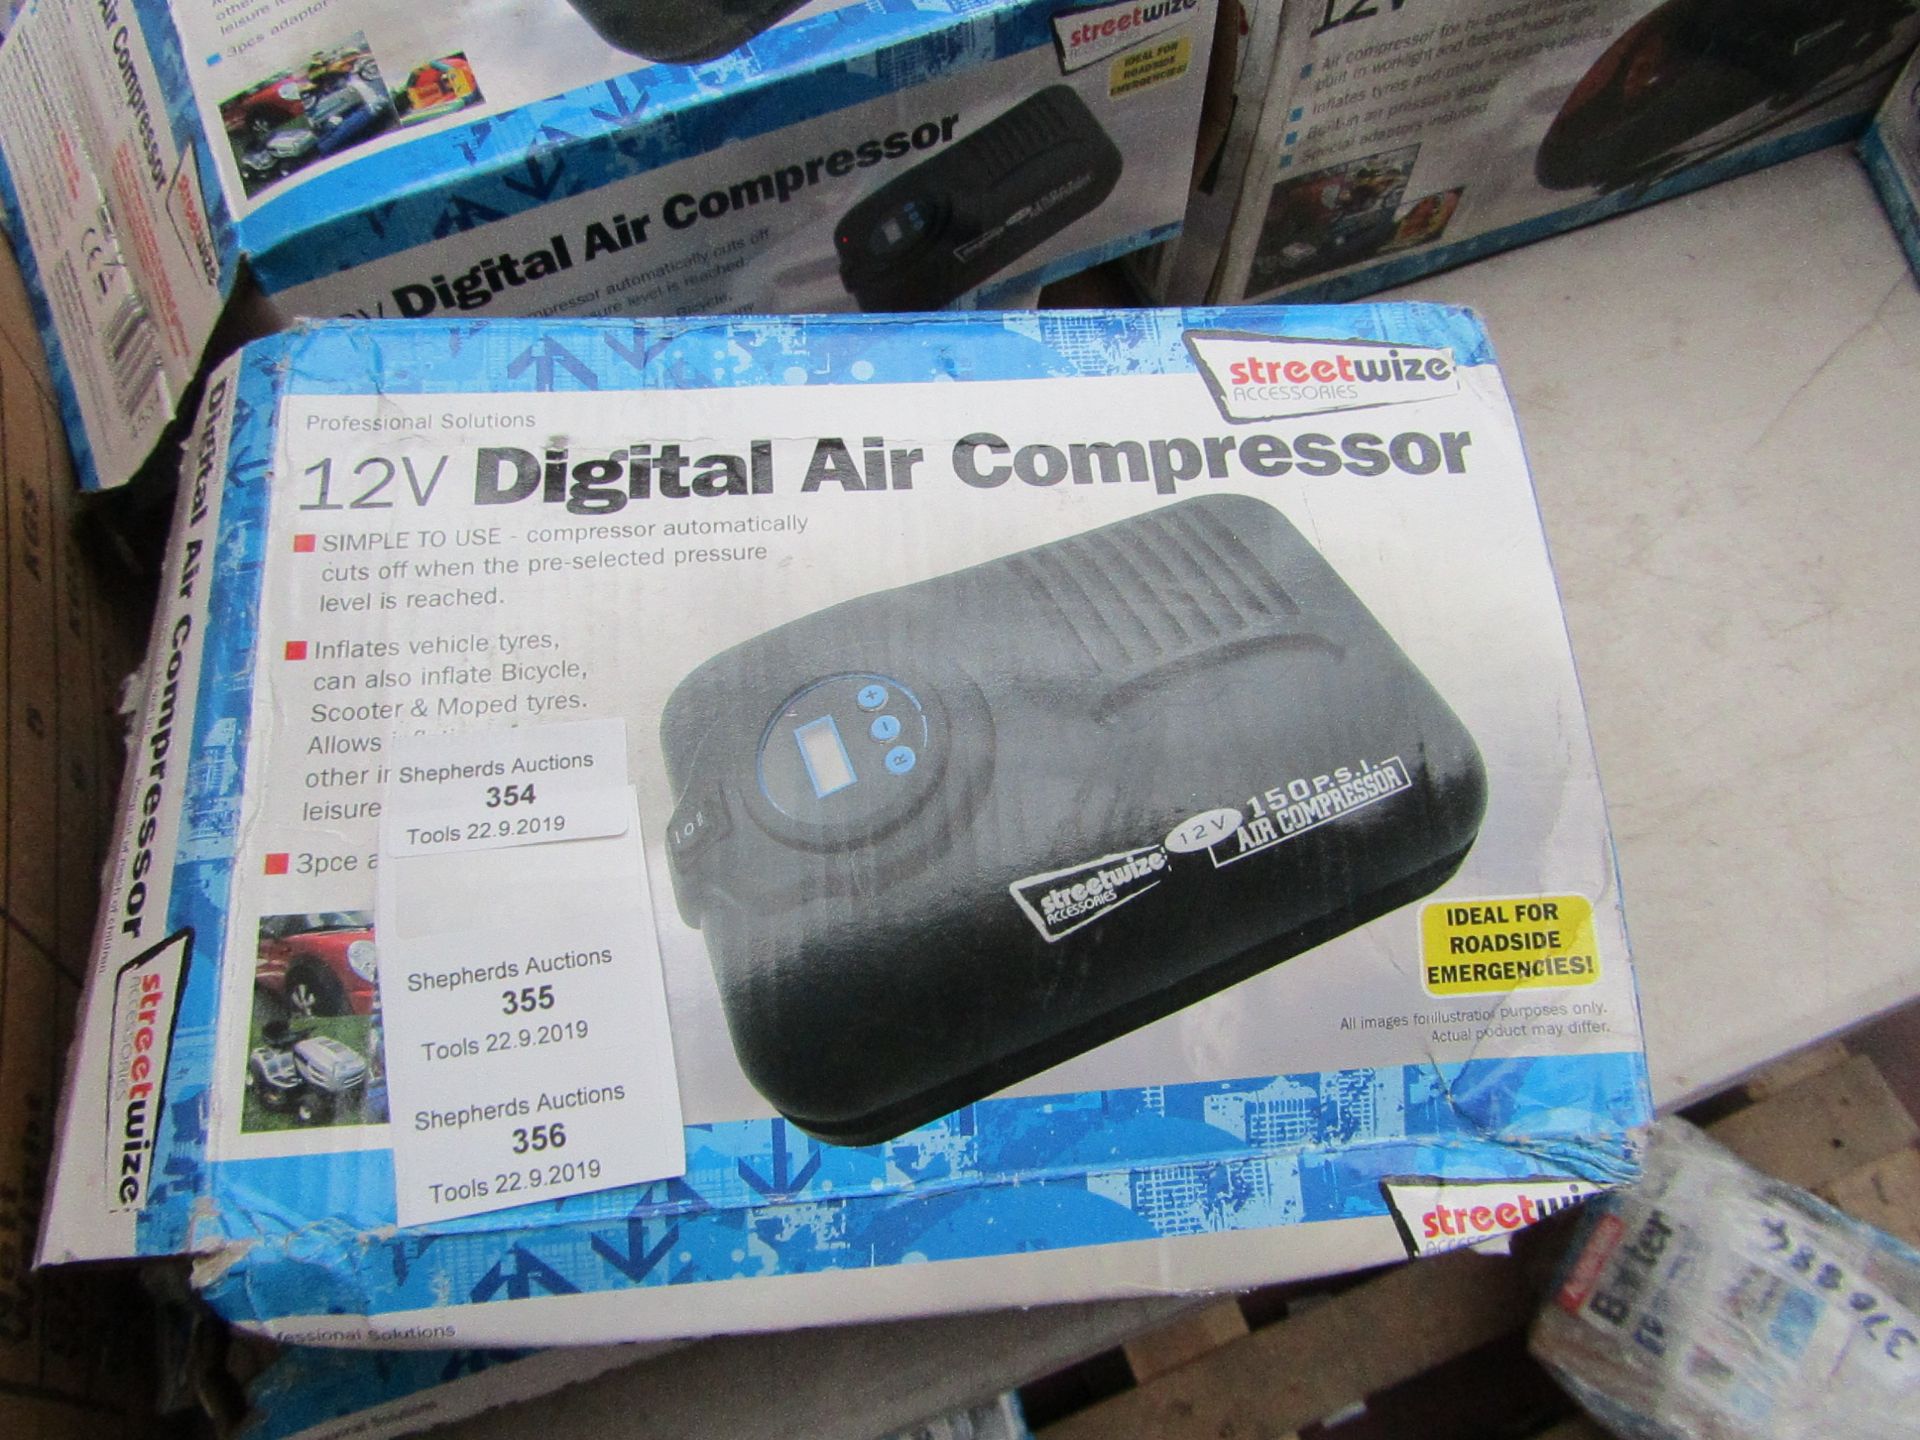 2x Streetwise 12v Air compressors, boxed and unchecked